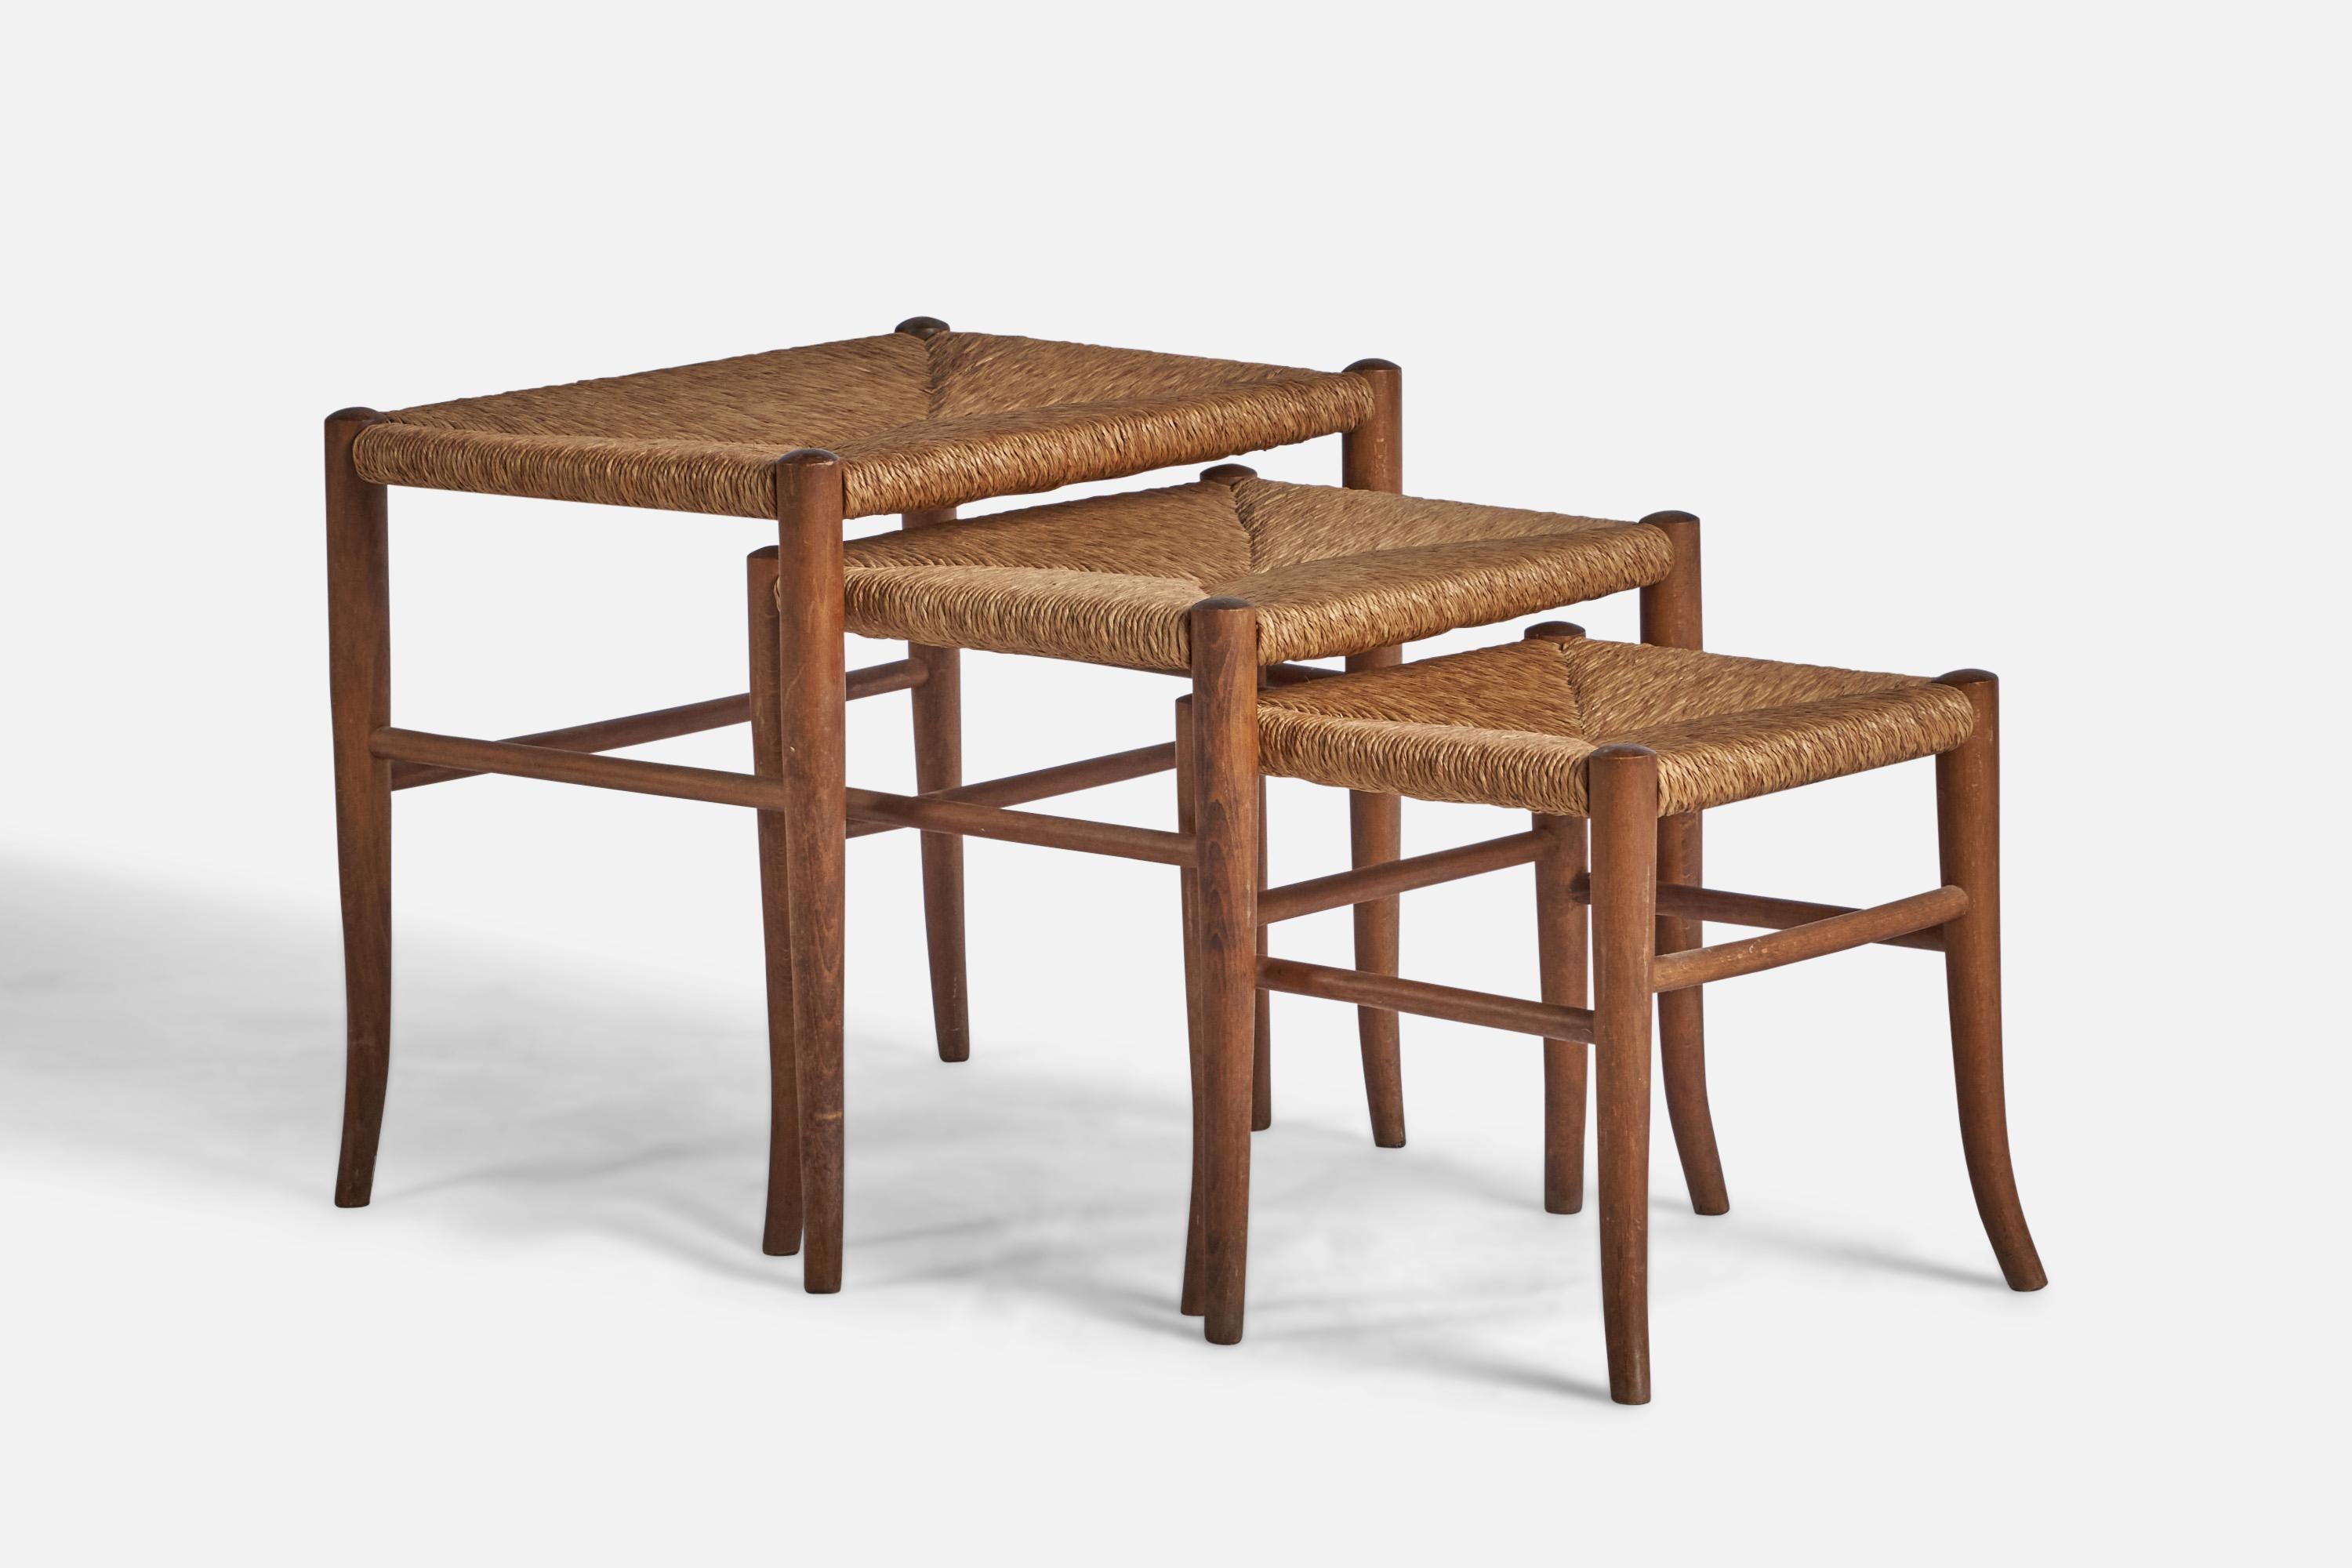 A set of 3 oak and rush stools designed and produced in Italy, 1940s.
Stamped 